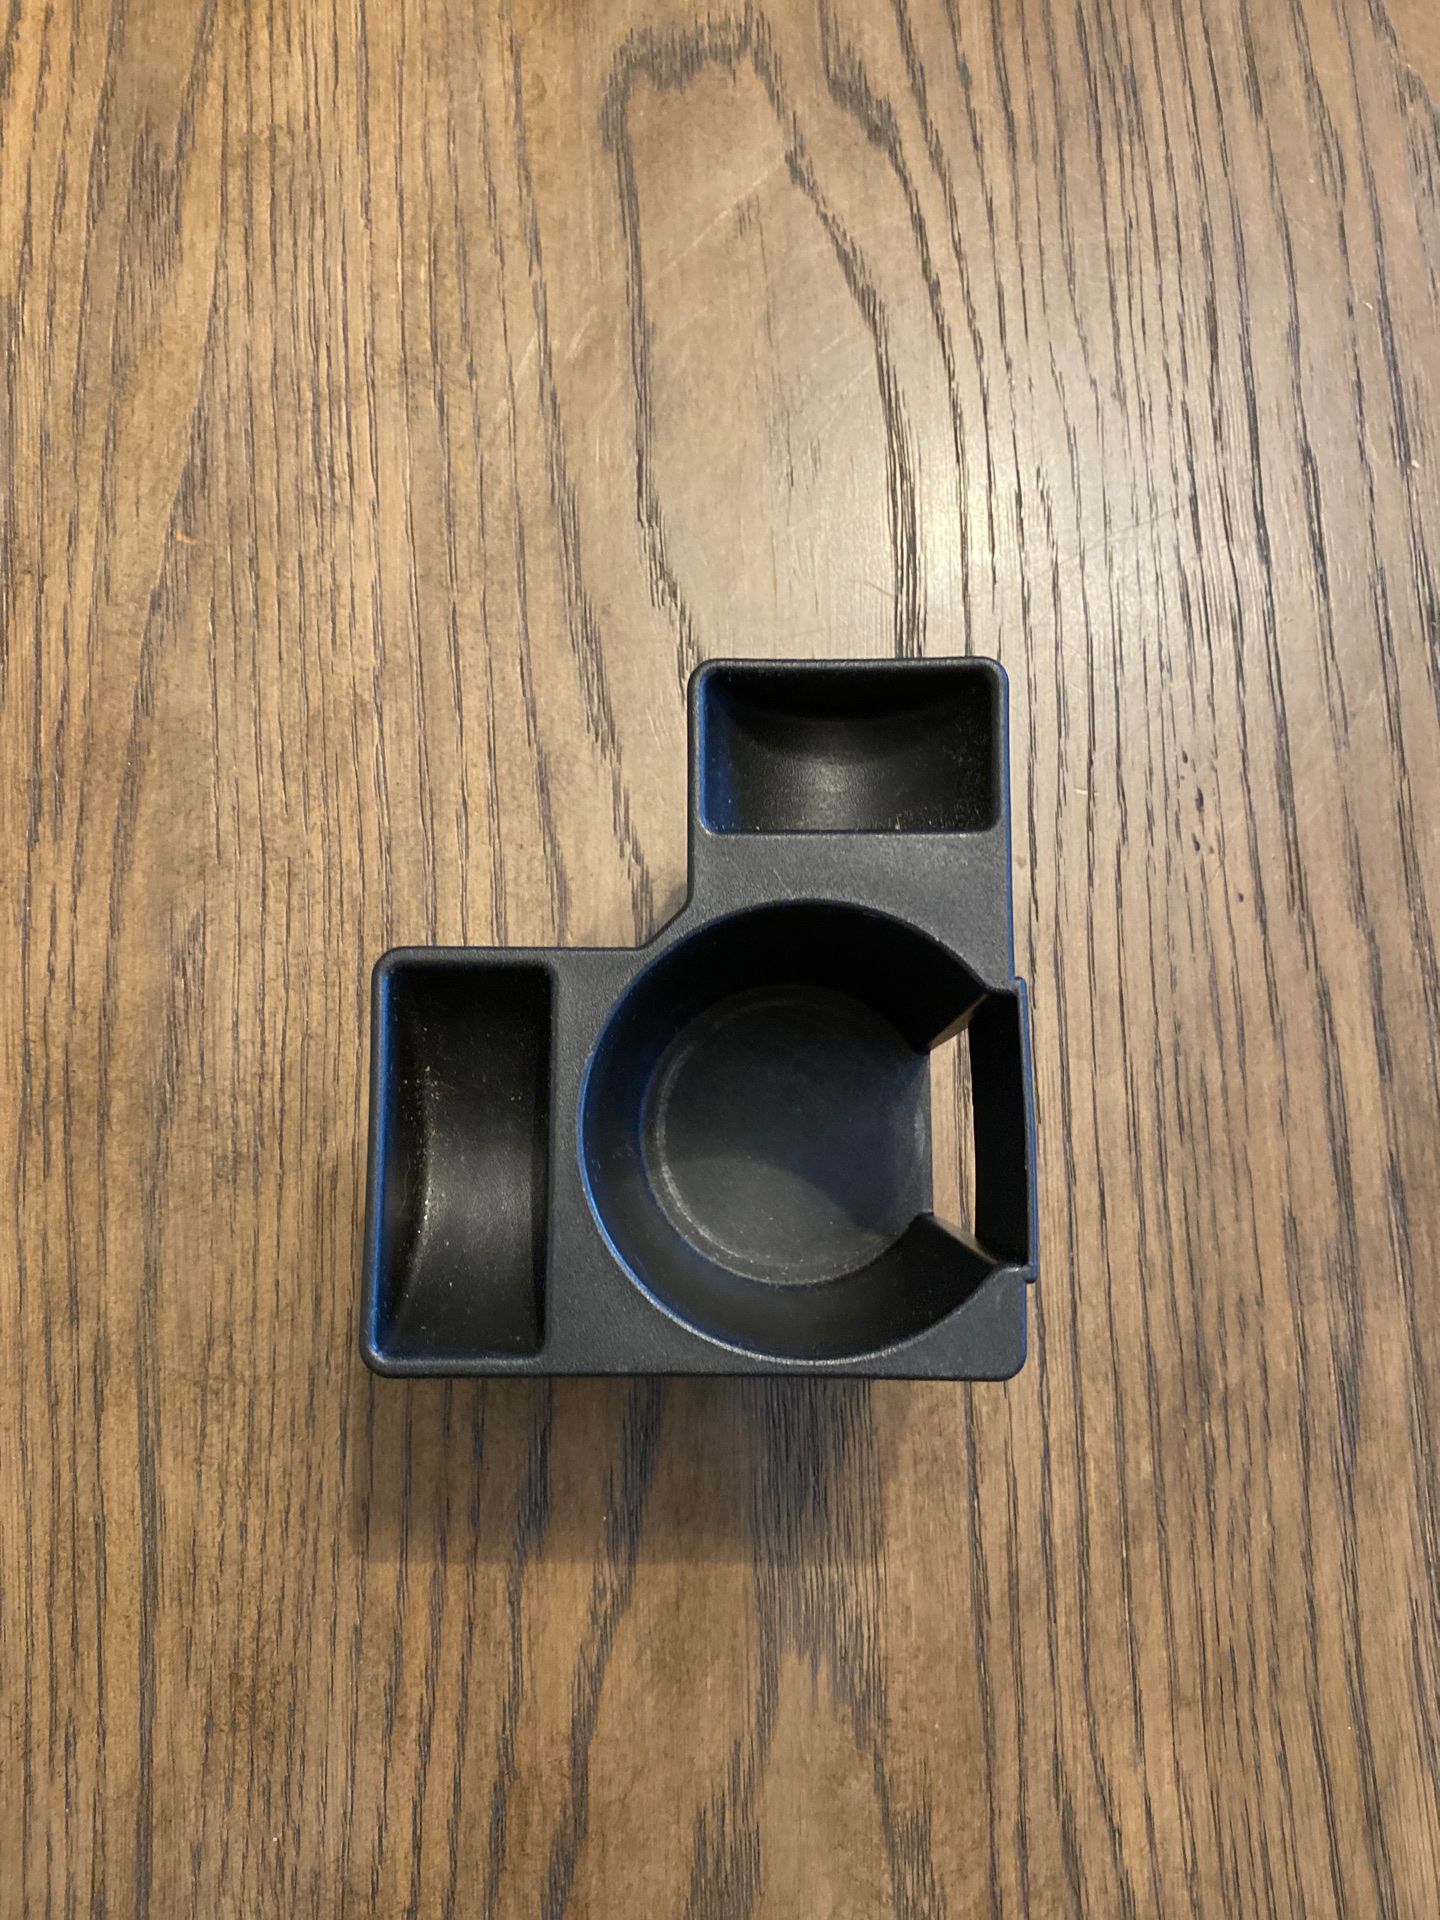 Little cup holder from 2014 Infiniti QX80